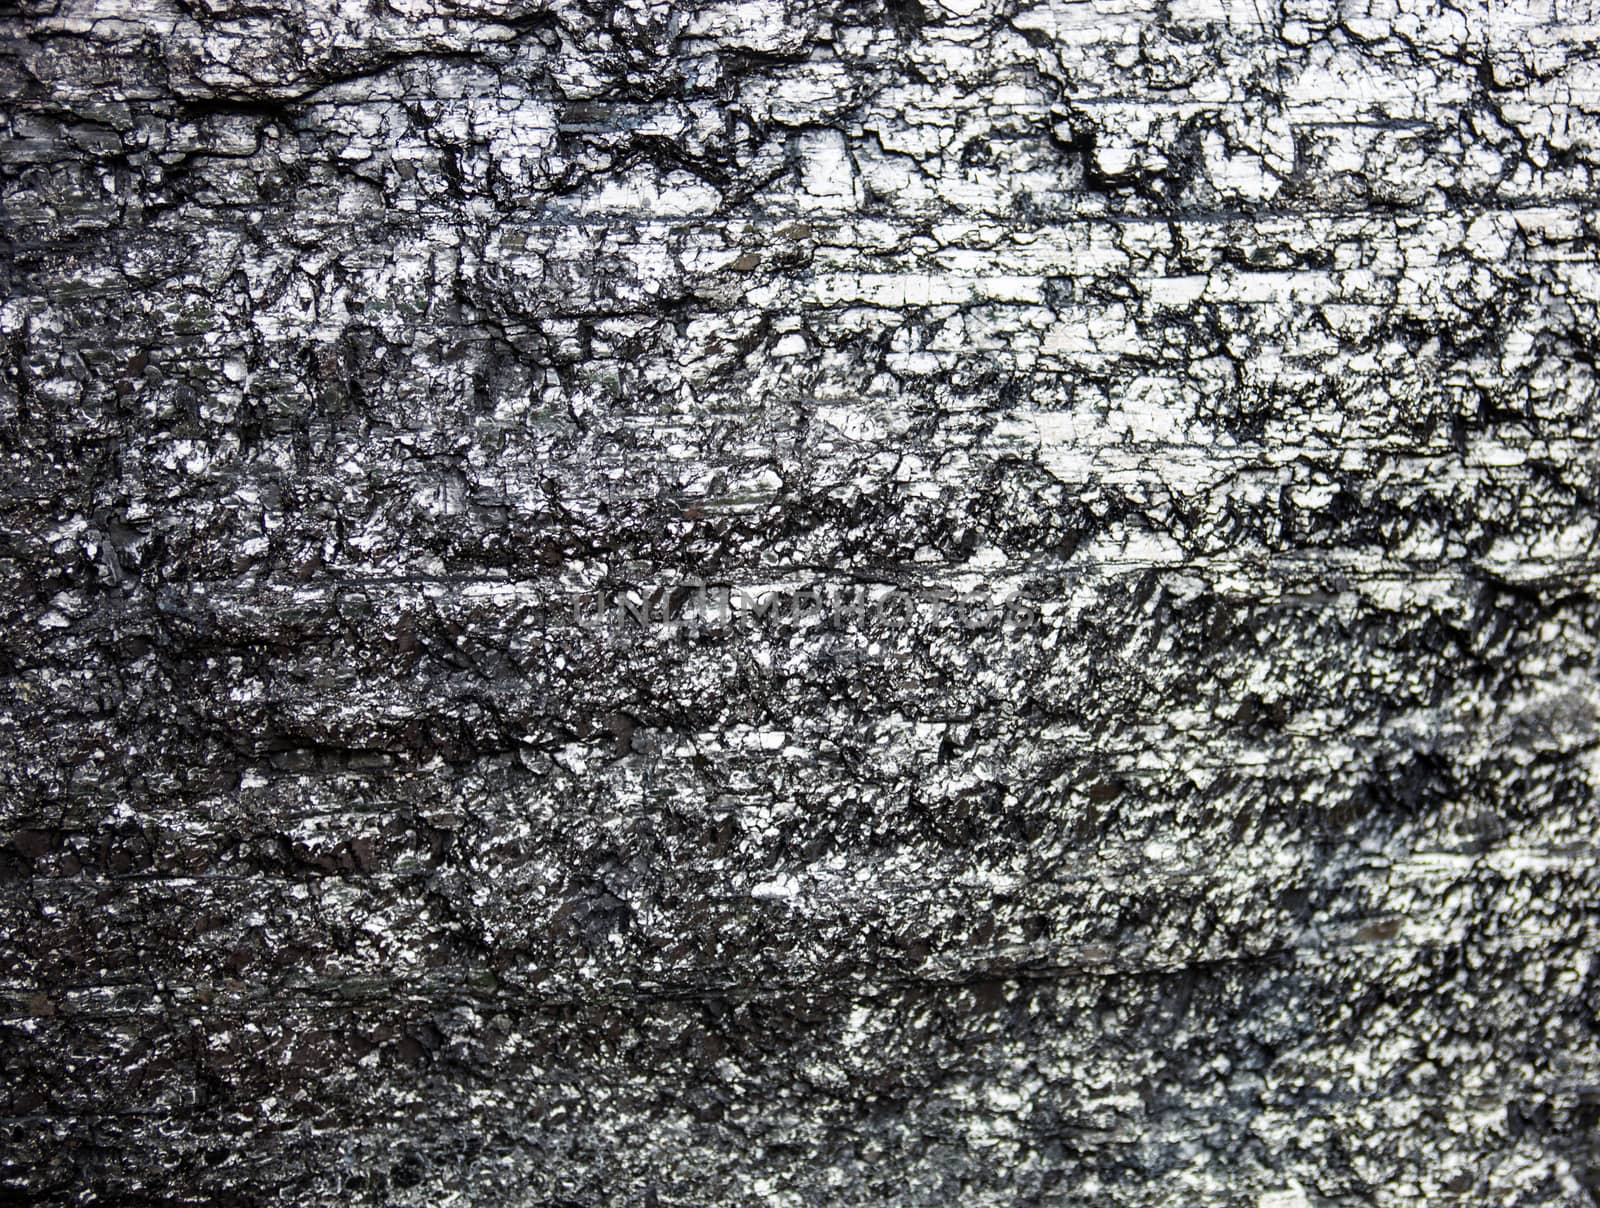 The surface of the black coal with rich texture